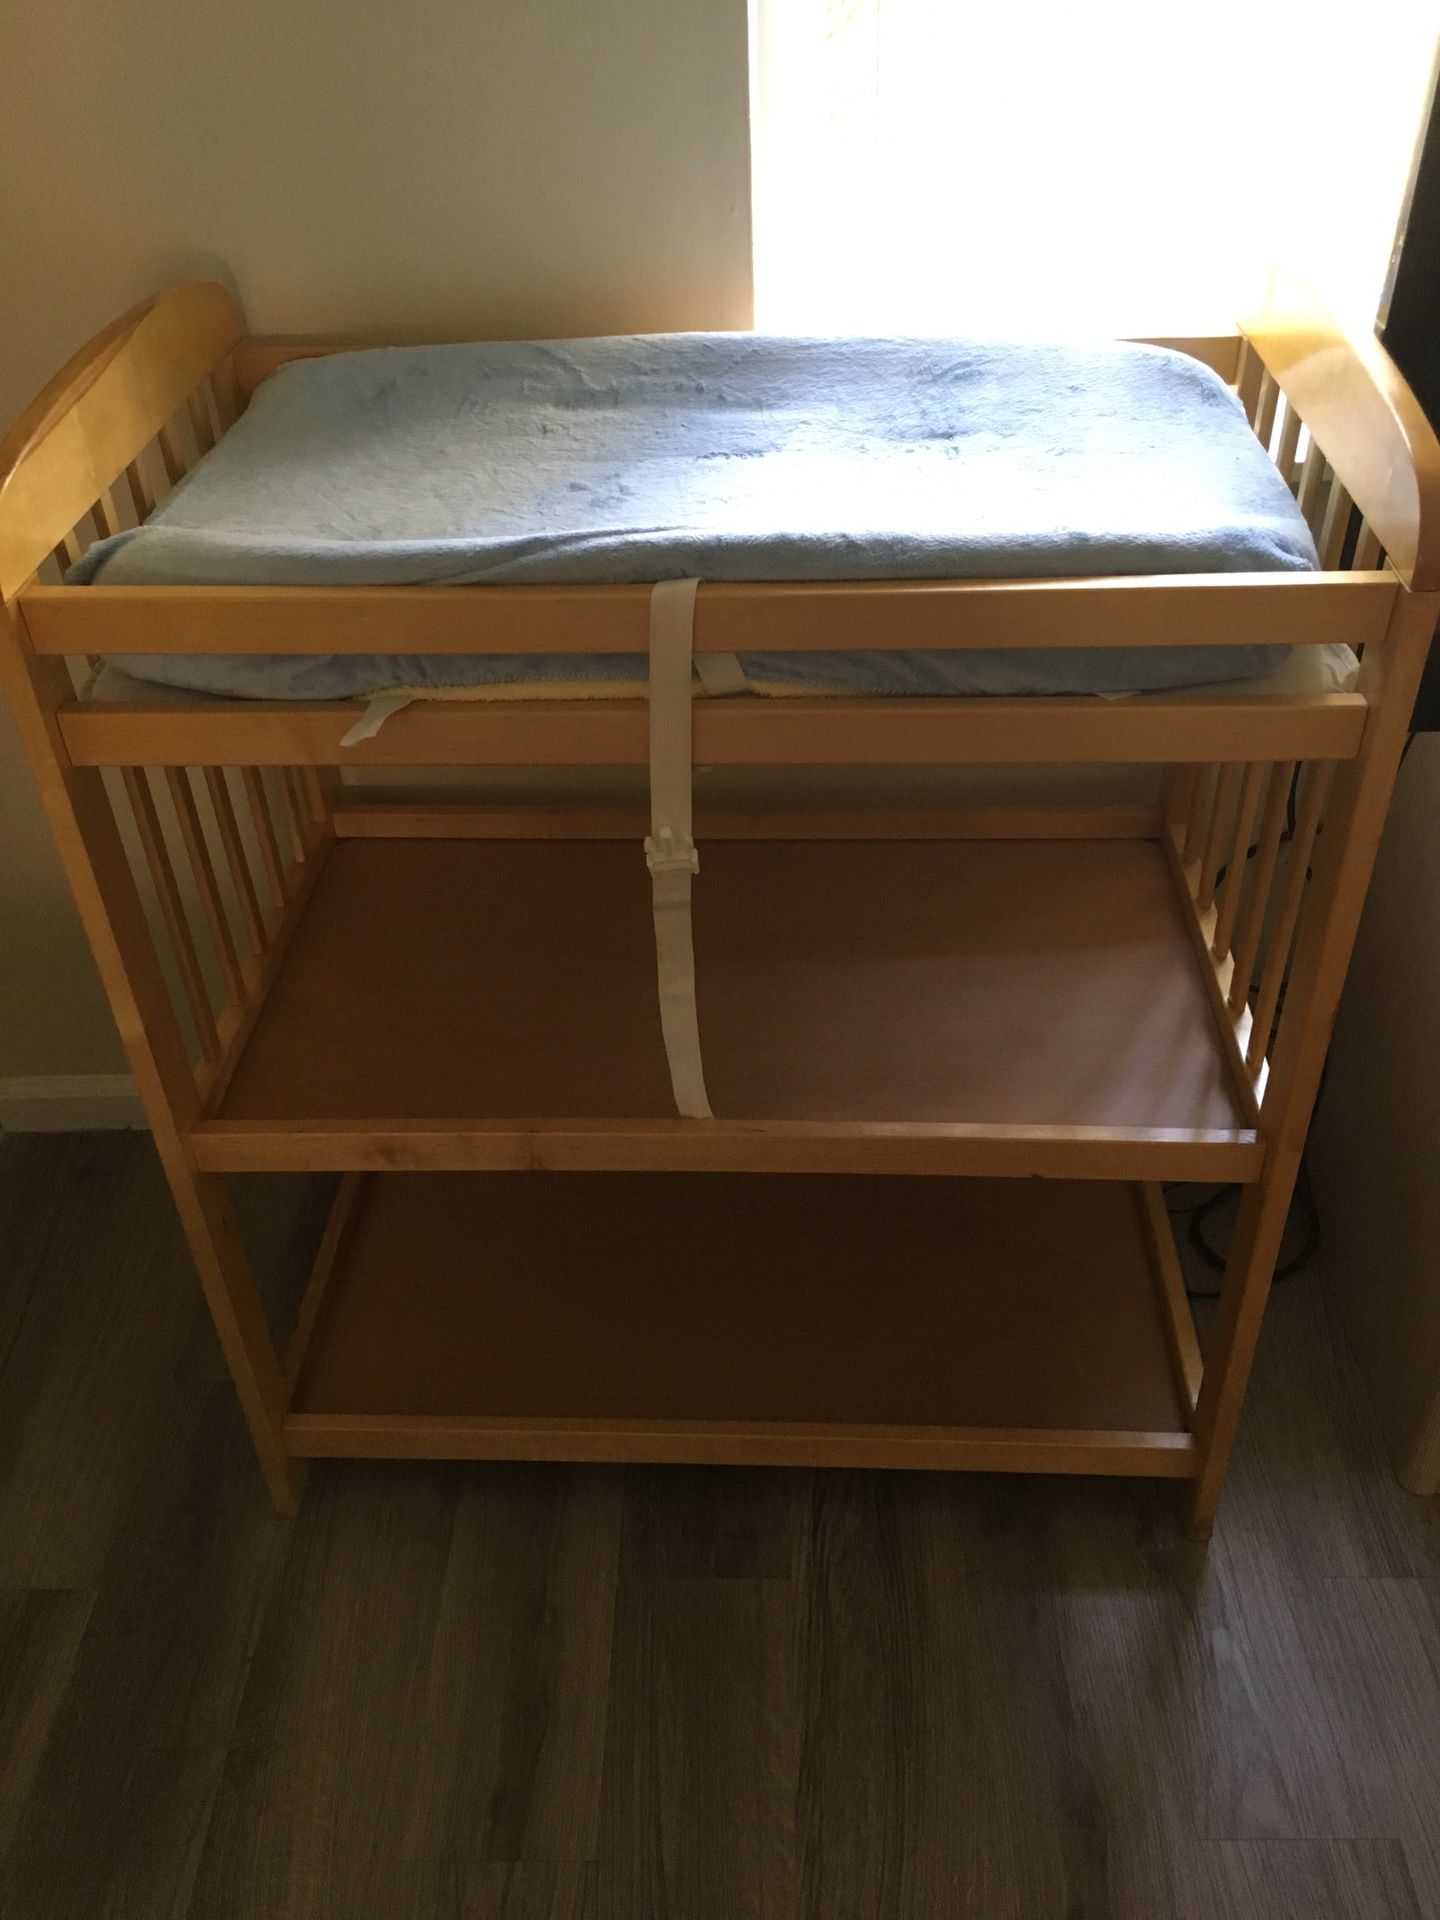 Changing table with pad and pad covers